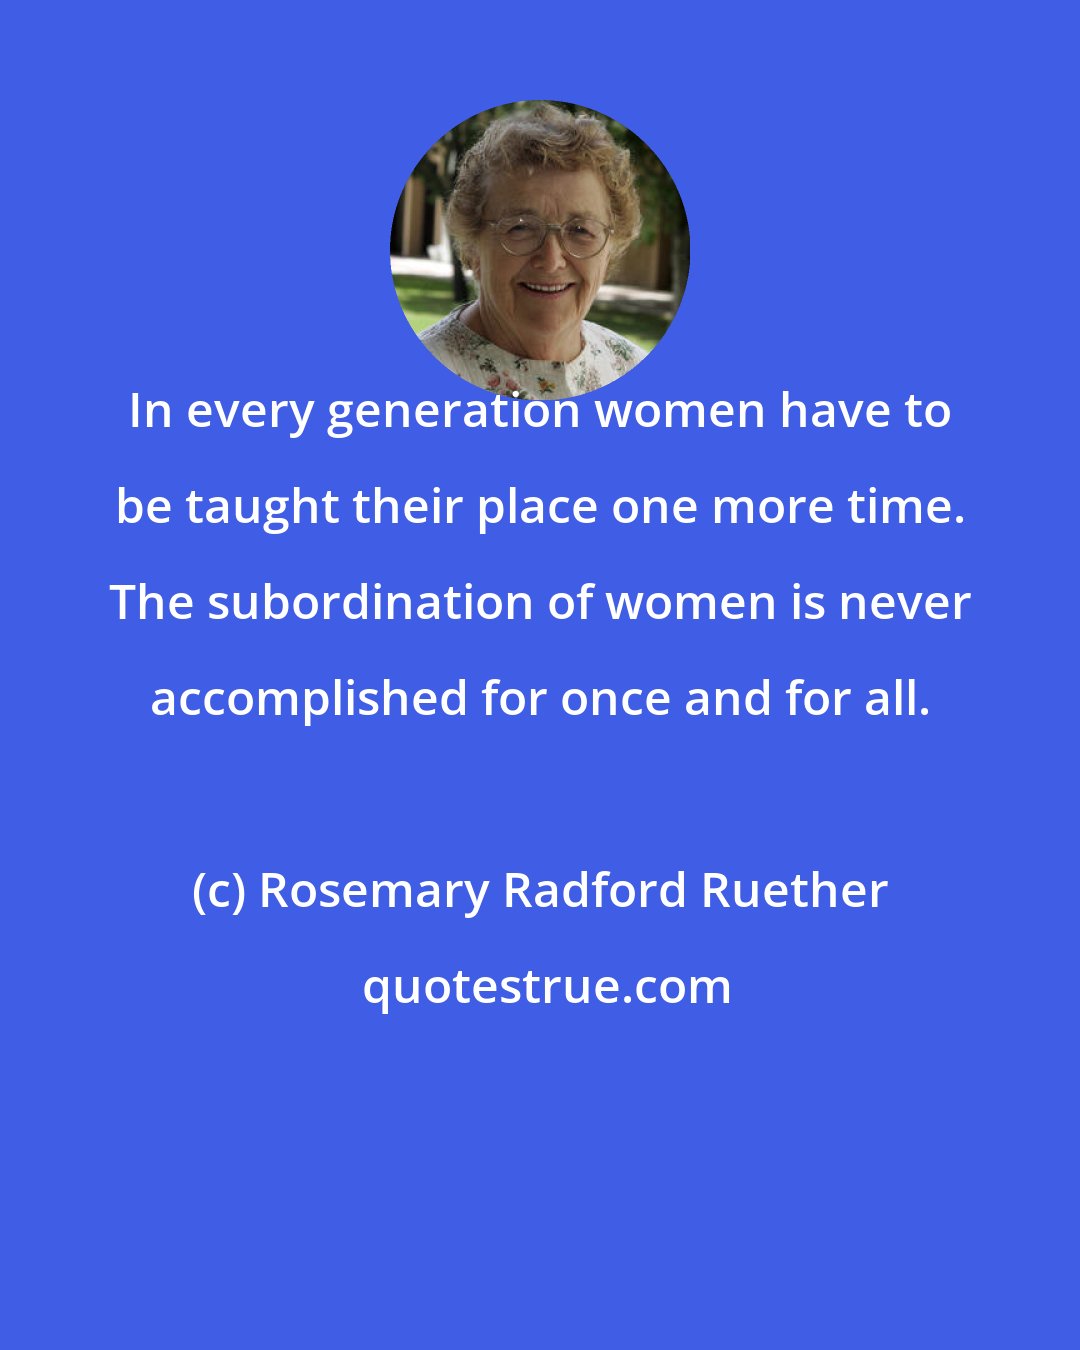 Rosemary Radford Ruether: In every generation women have to be taught their place one more time. The subordination of women is never accomplished for once and for all.